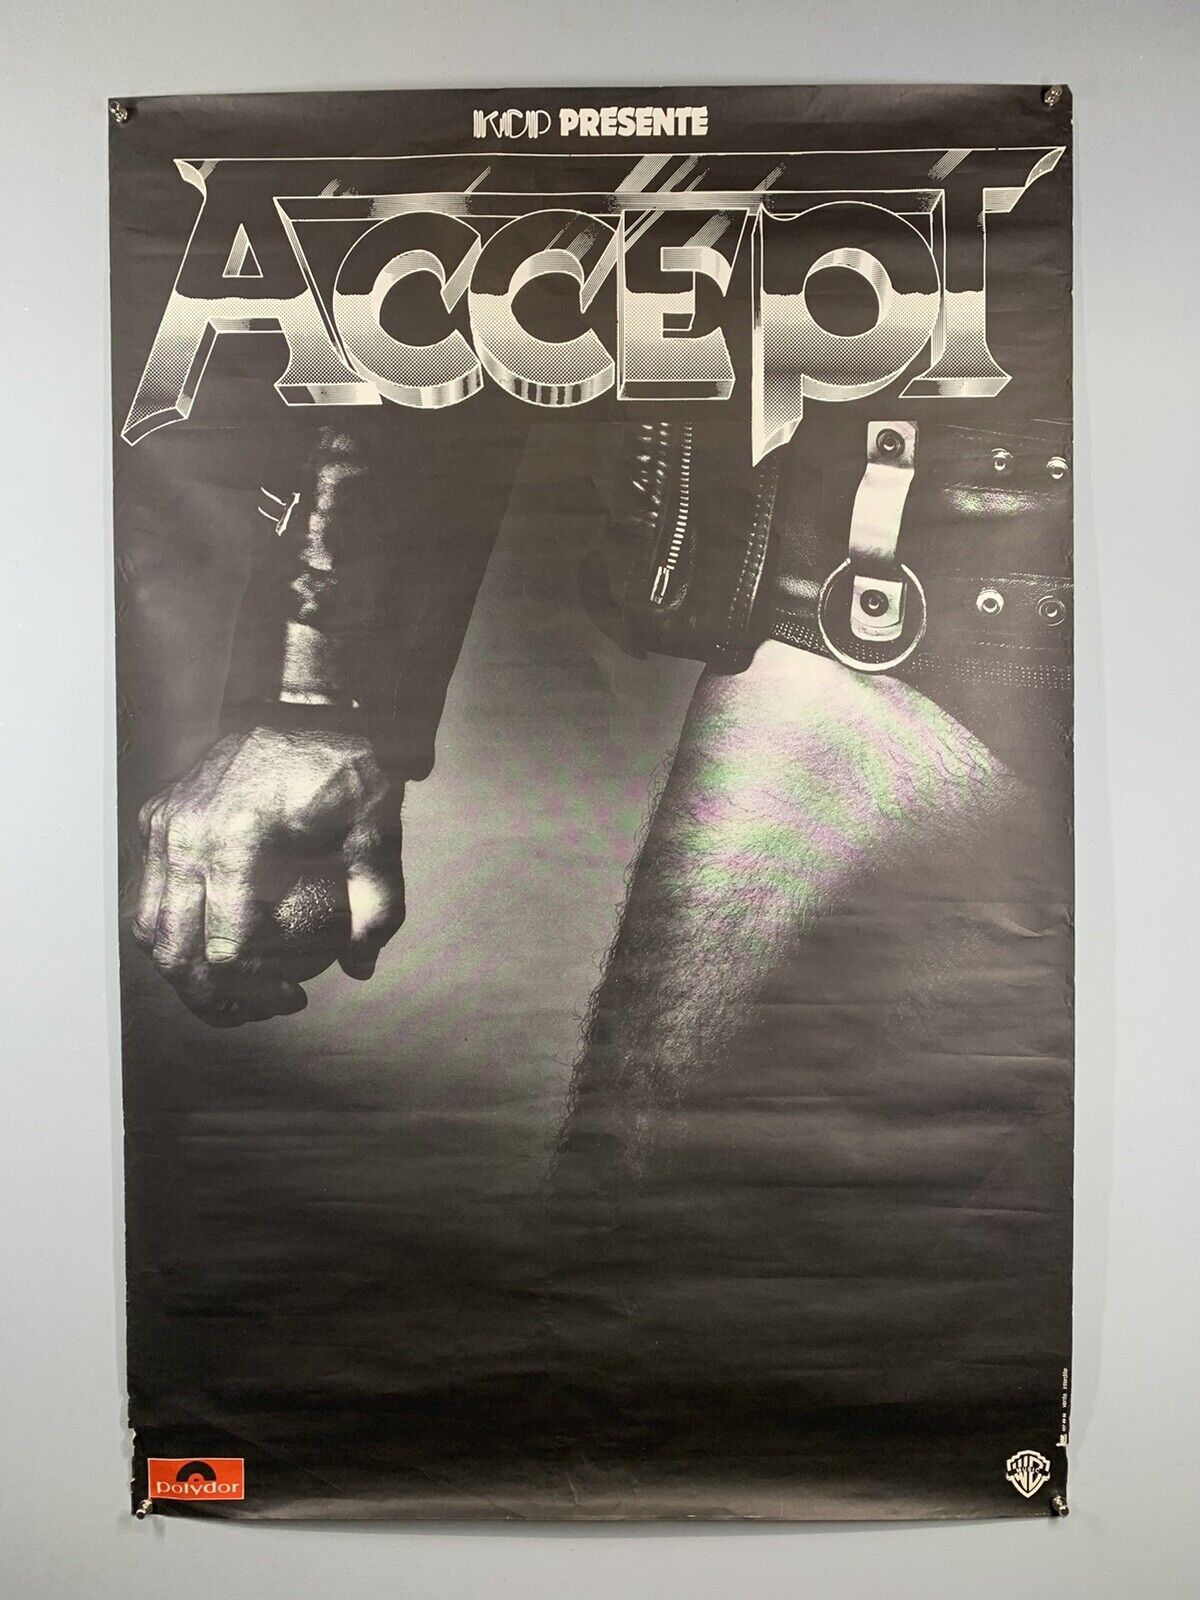 Accept Poster Vintage French Polydor Promo Balls to the Wall LP 1983